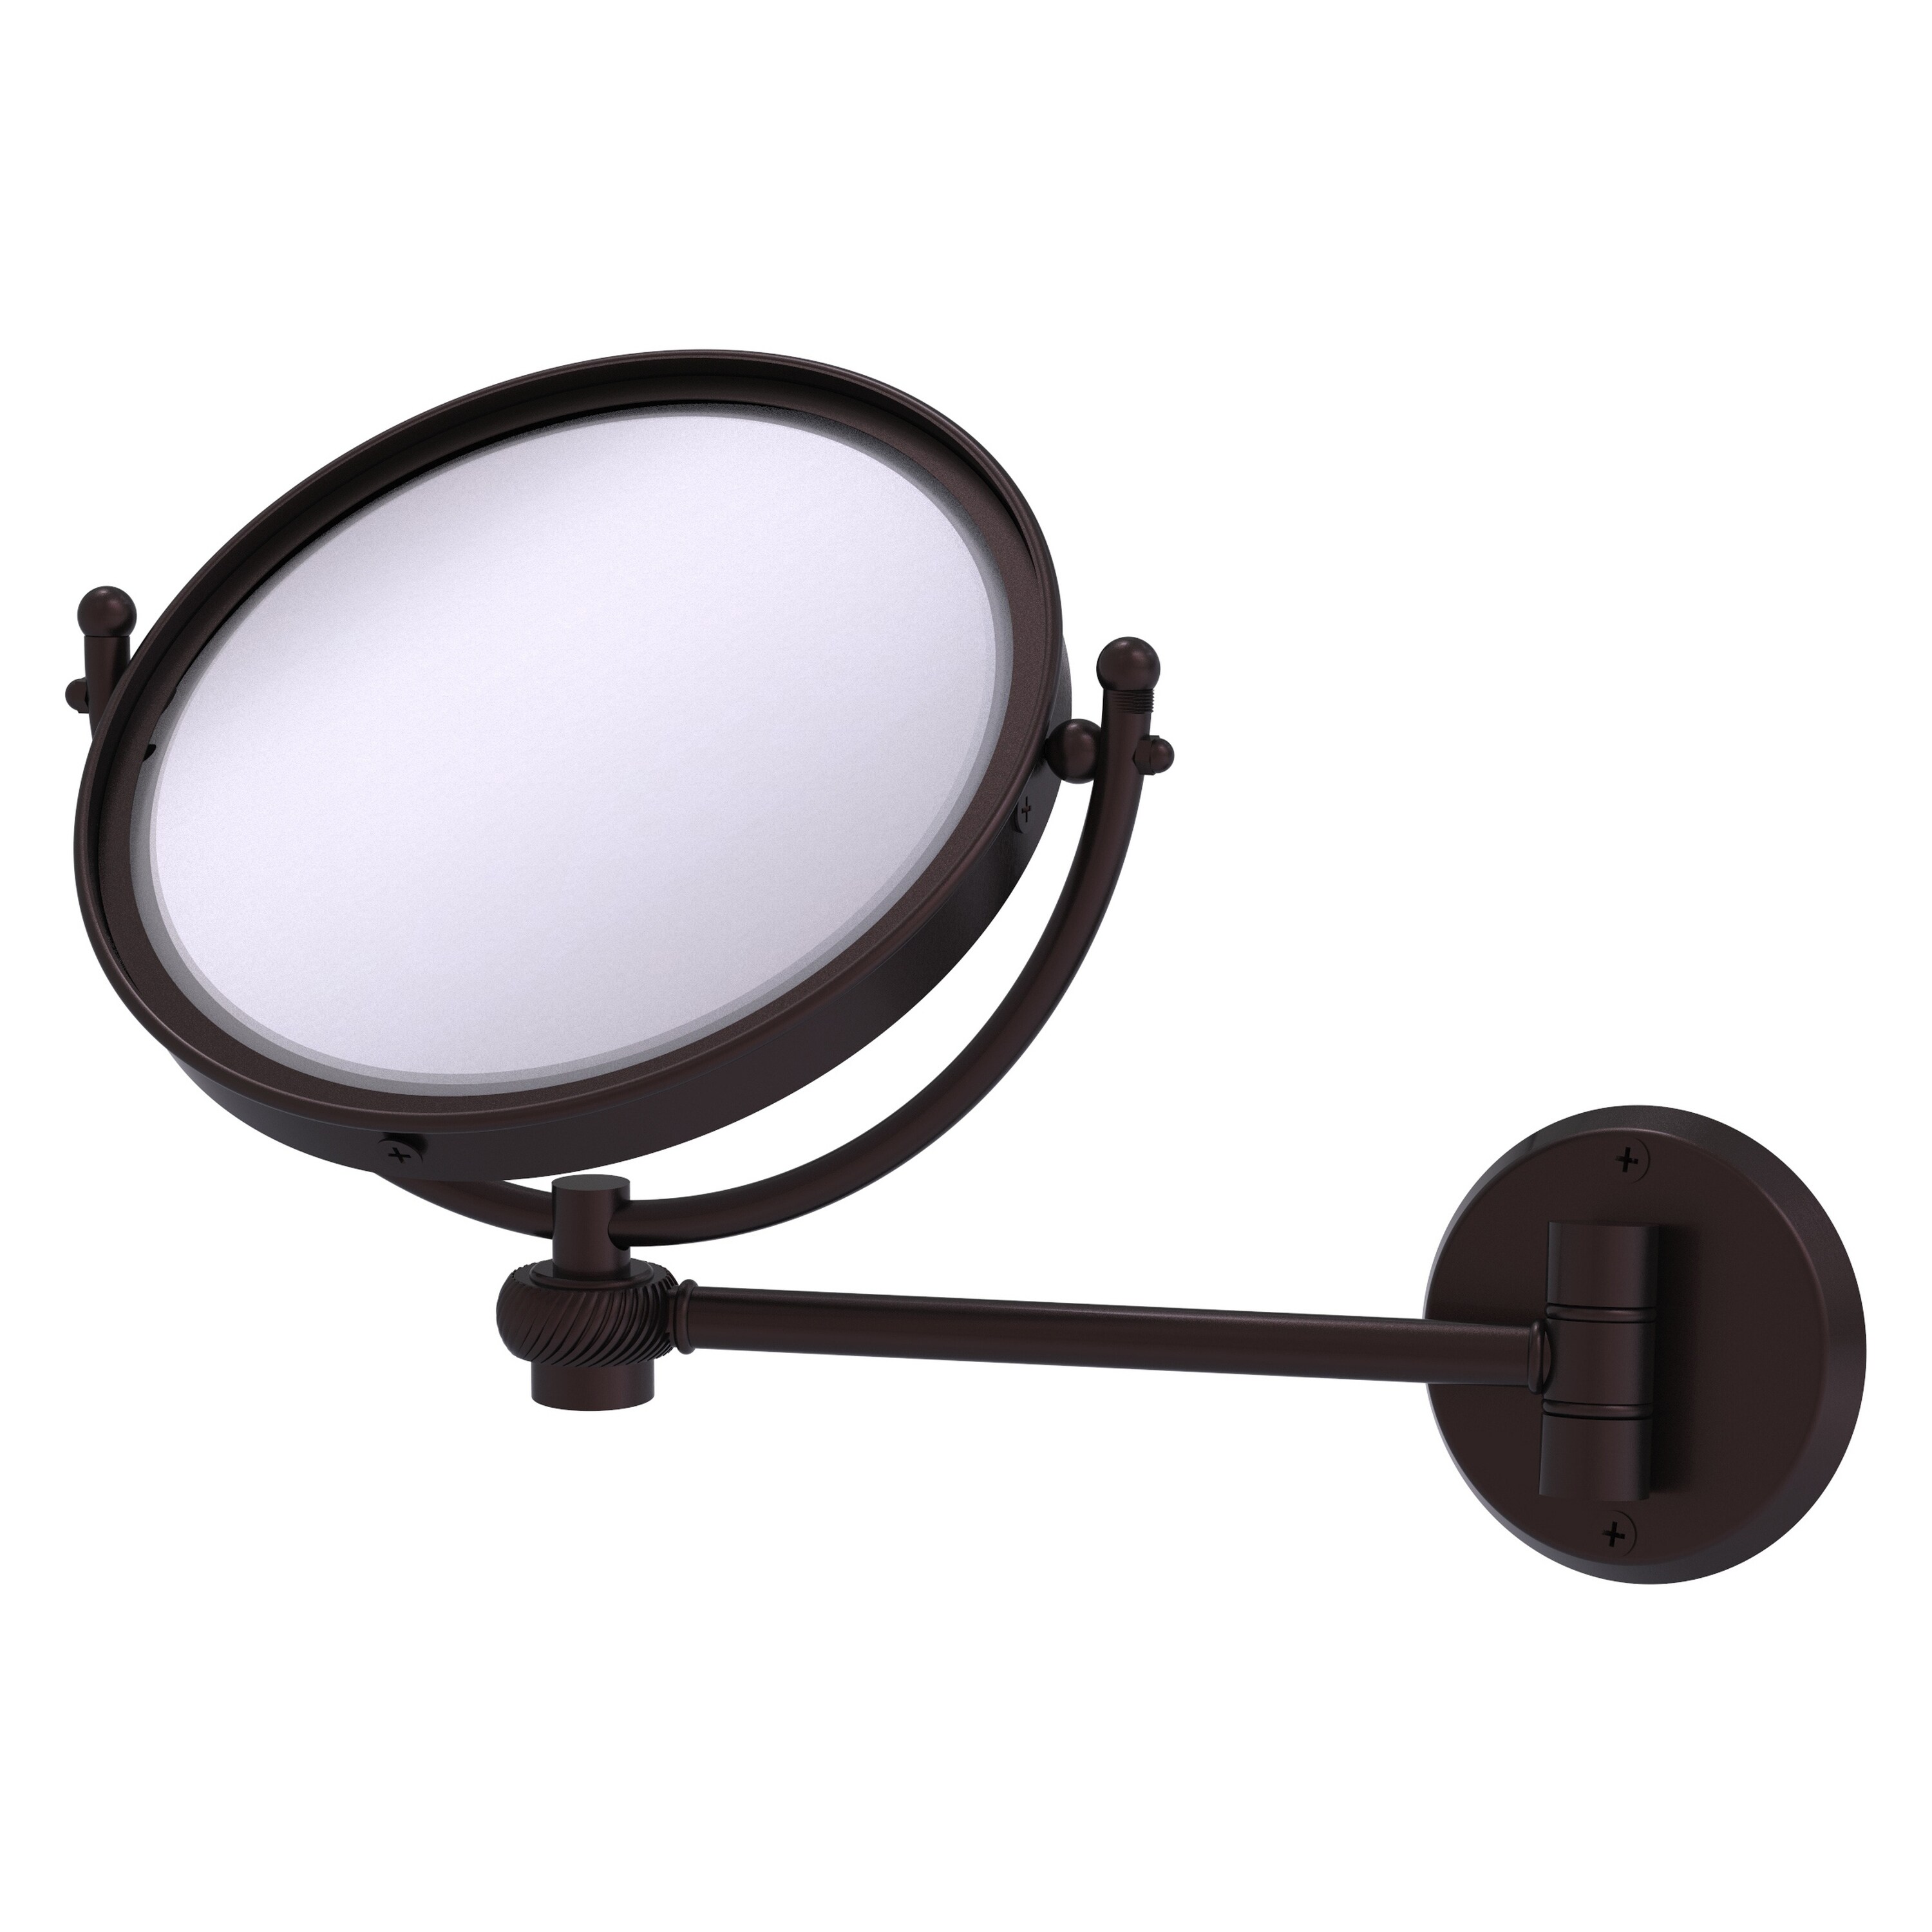 8-in x 10-in Antique Brown Double-sided 2X Magnifying Wall-mounted Vanity Mirror | - Allied Brass WM-5T/2X-ABZ